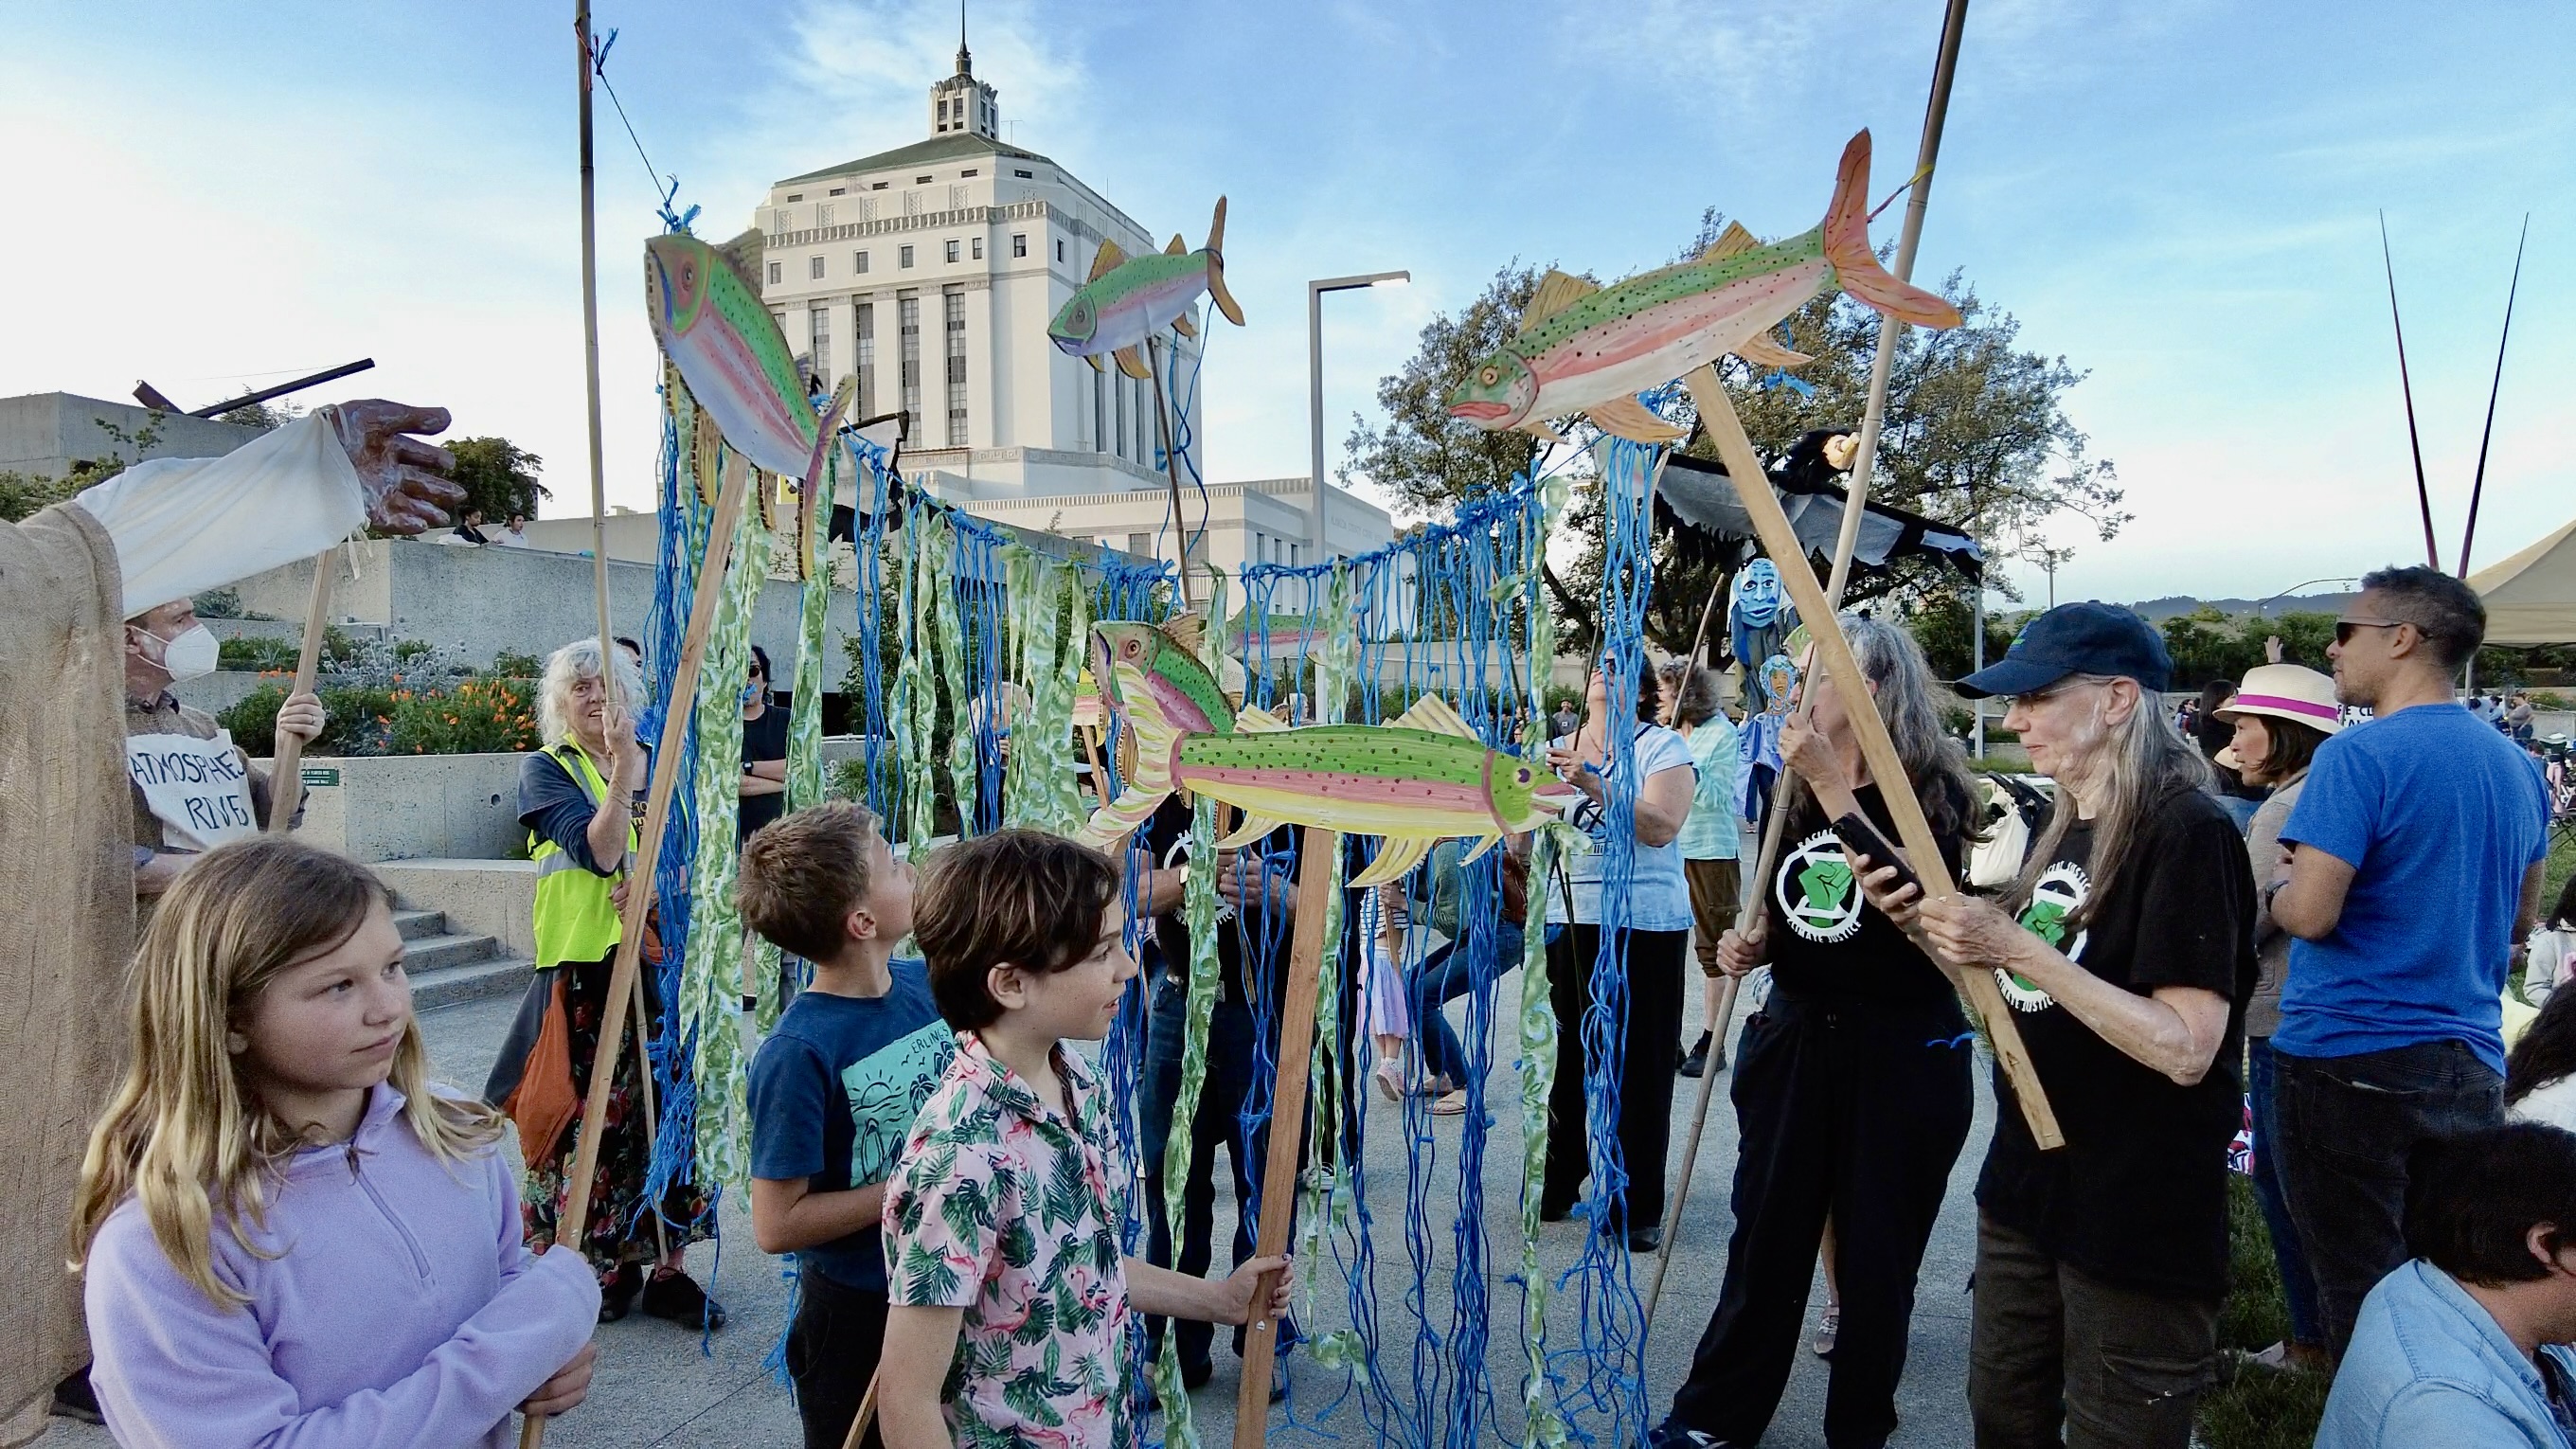 Youth and adults stand in a plaza holding blue and green banners and painted salmon